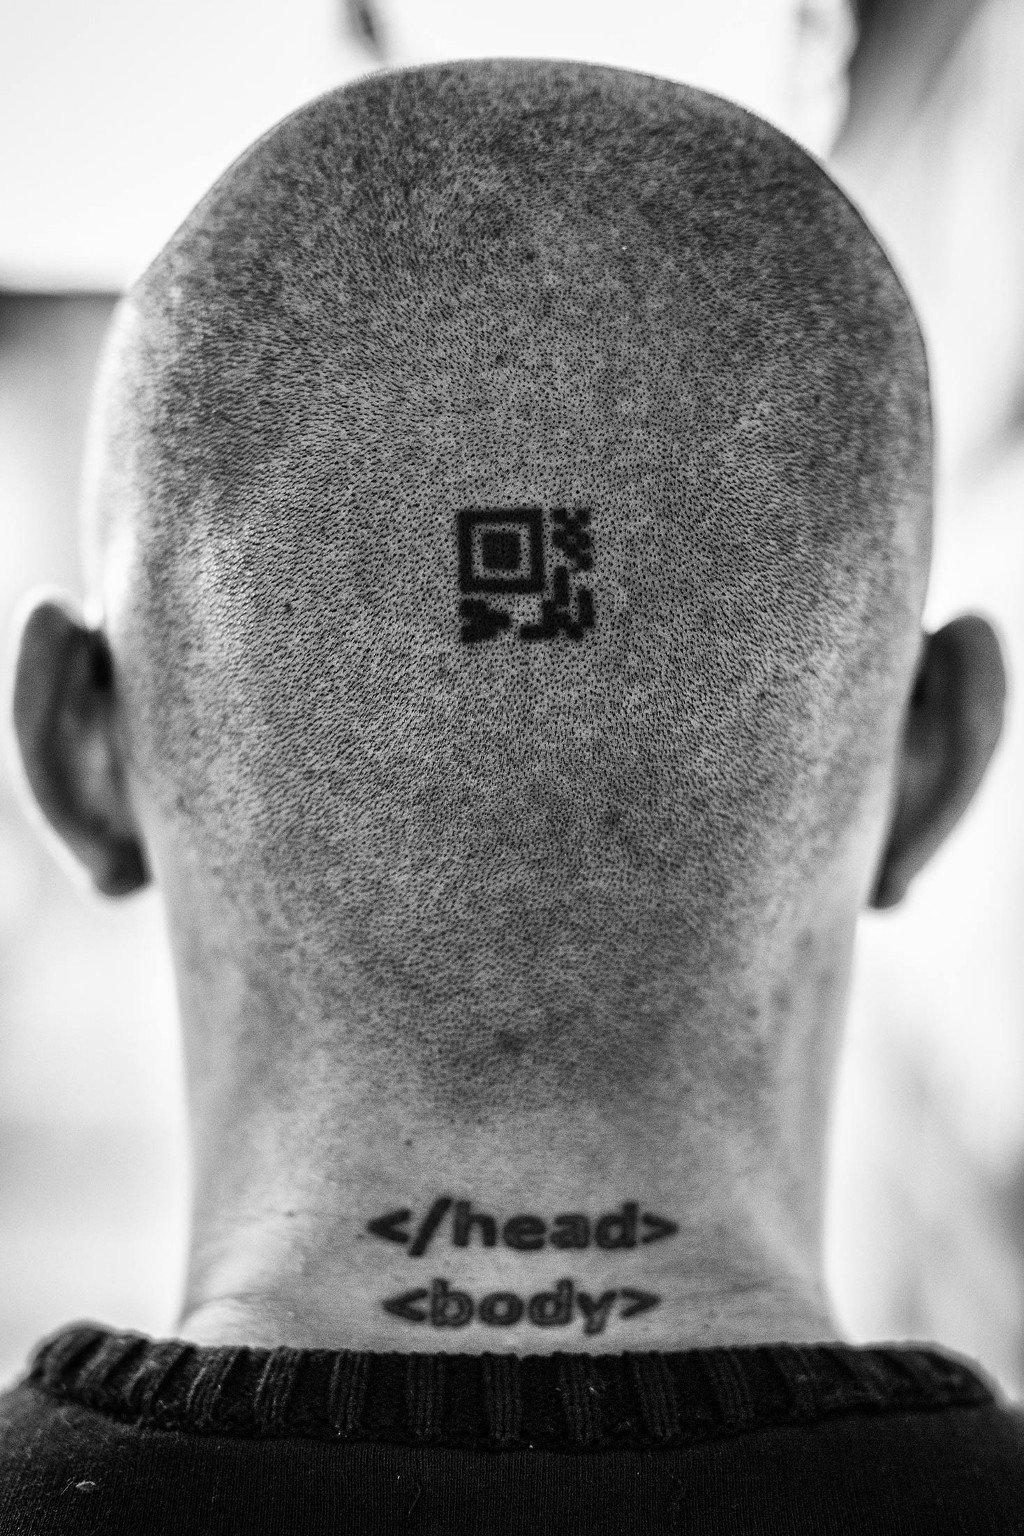  Sepúlveda’s head. The upper tattoo is a QR code containing an encryption key.